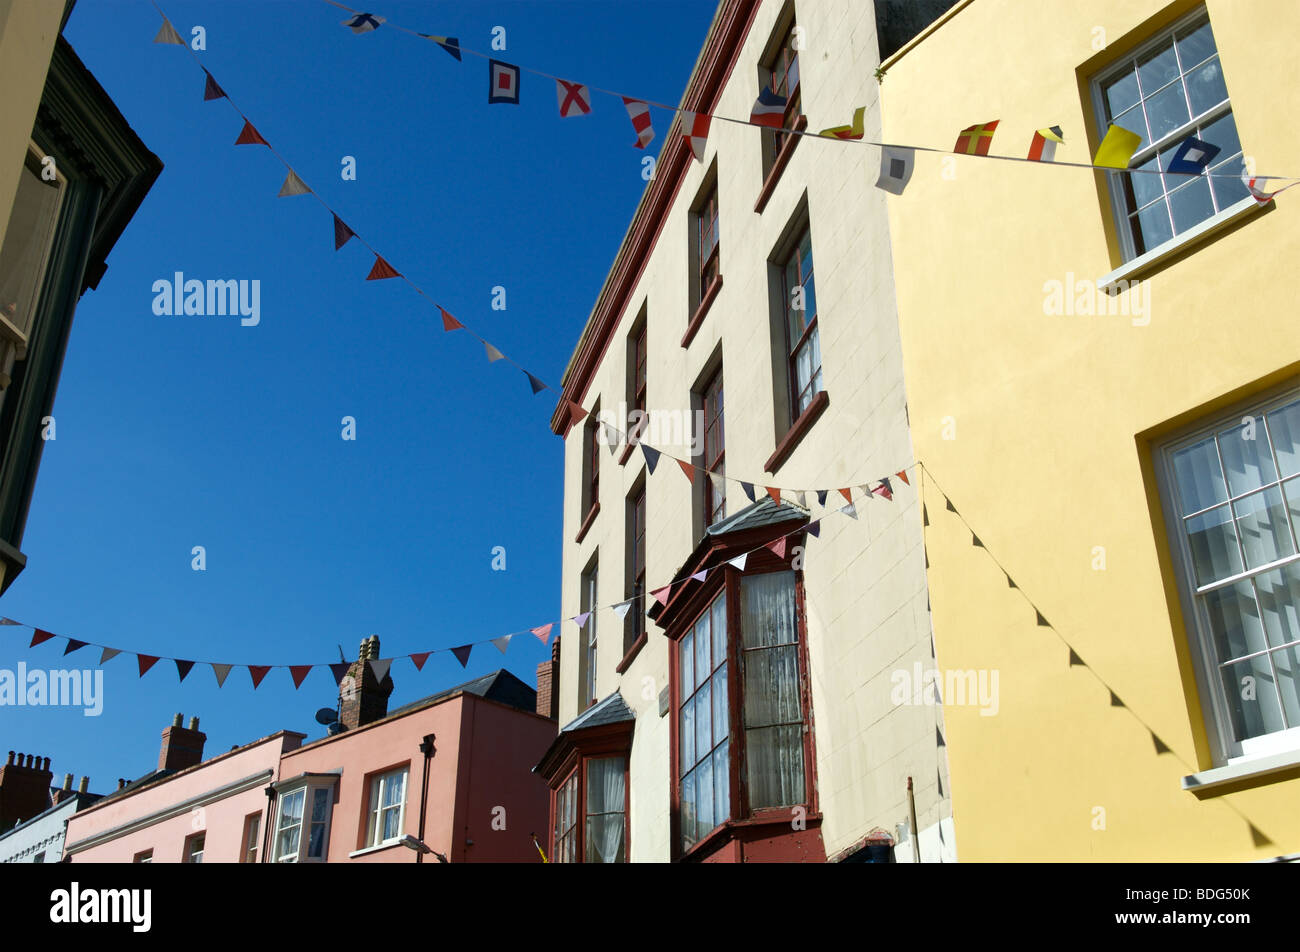 A row of colourful houses and bunting in Tenby, Pembrokeshire, Wales. Stock Photo